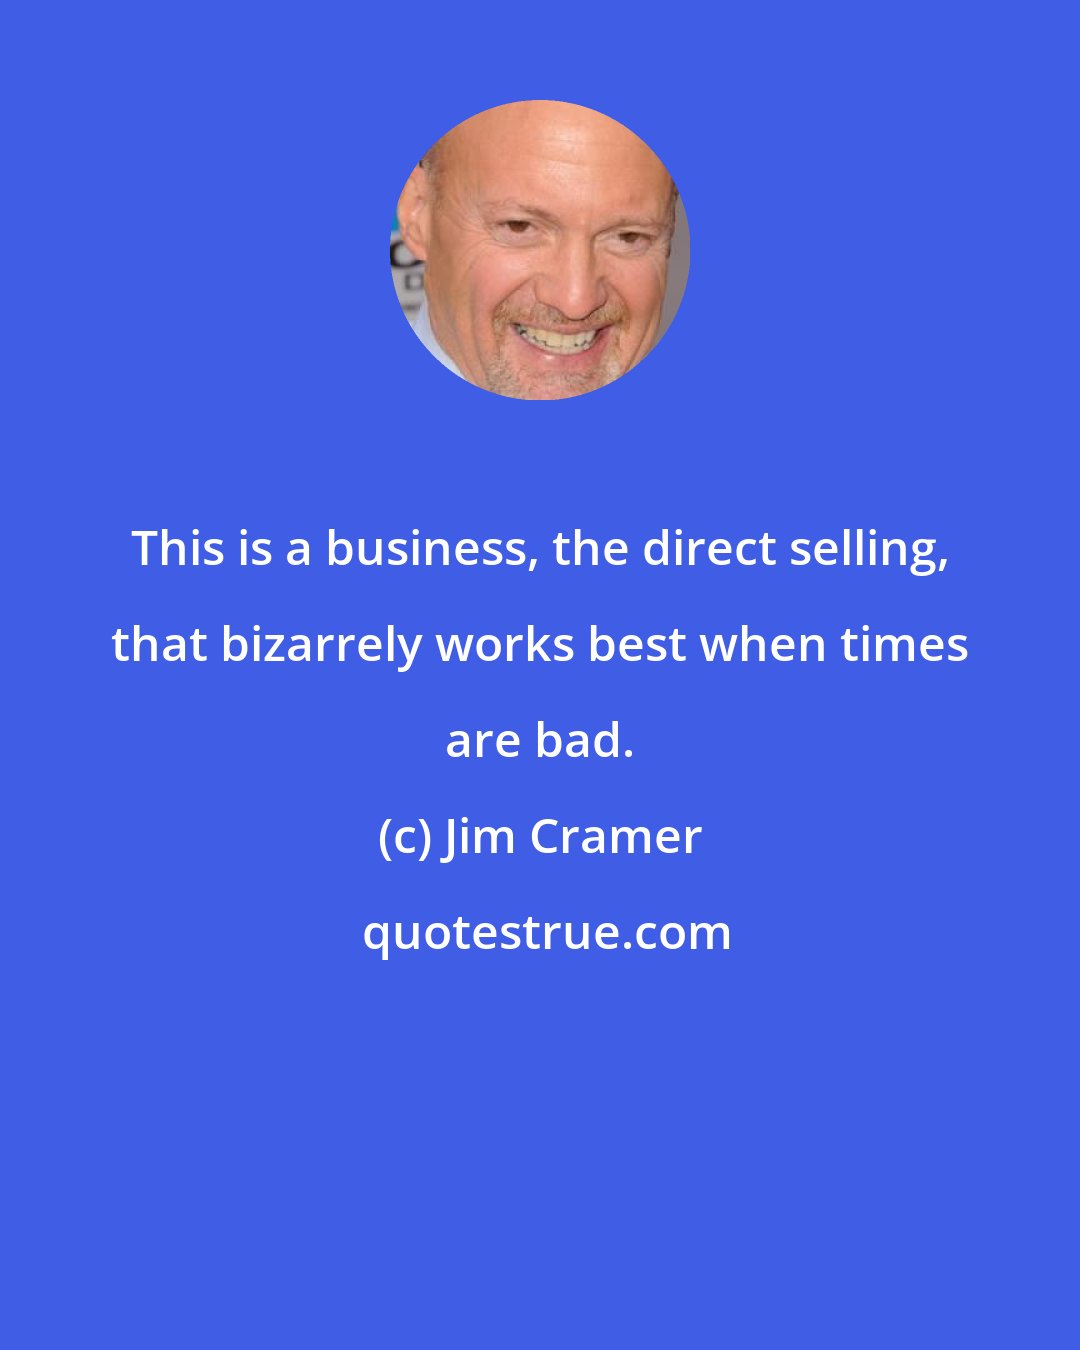 Jim Cramer: This is a business, the direct selling, that bizarrely works best when times are bad.